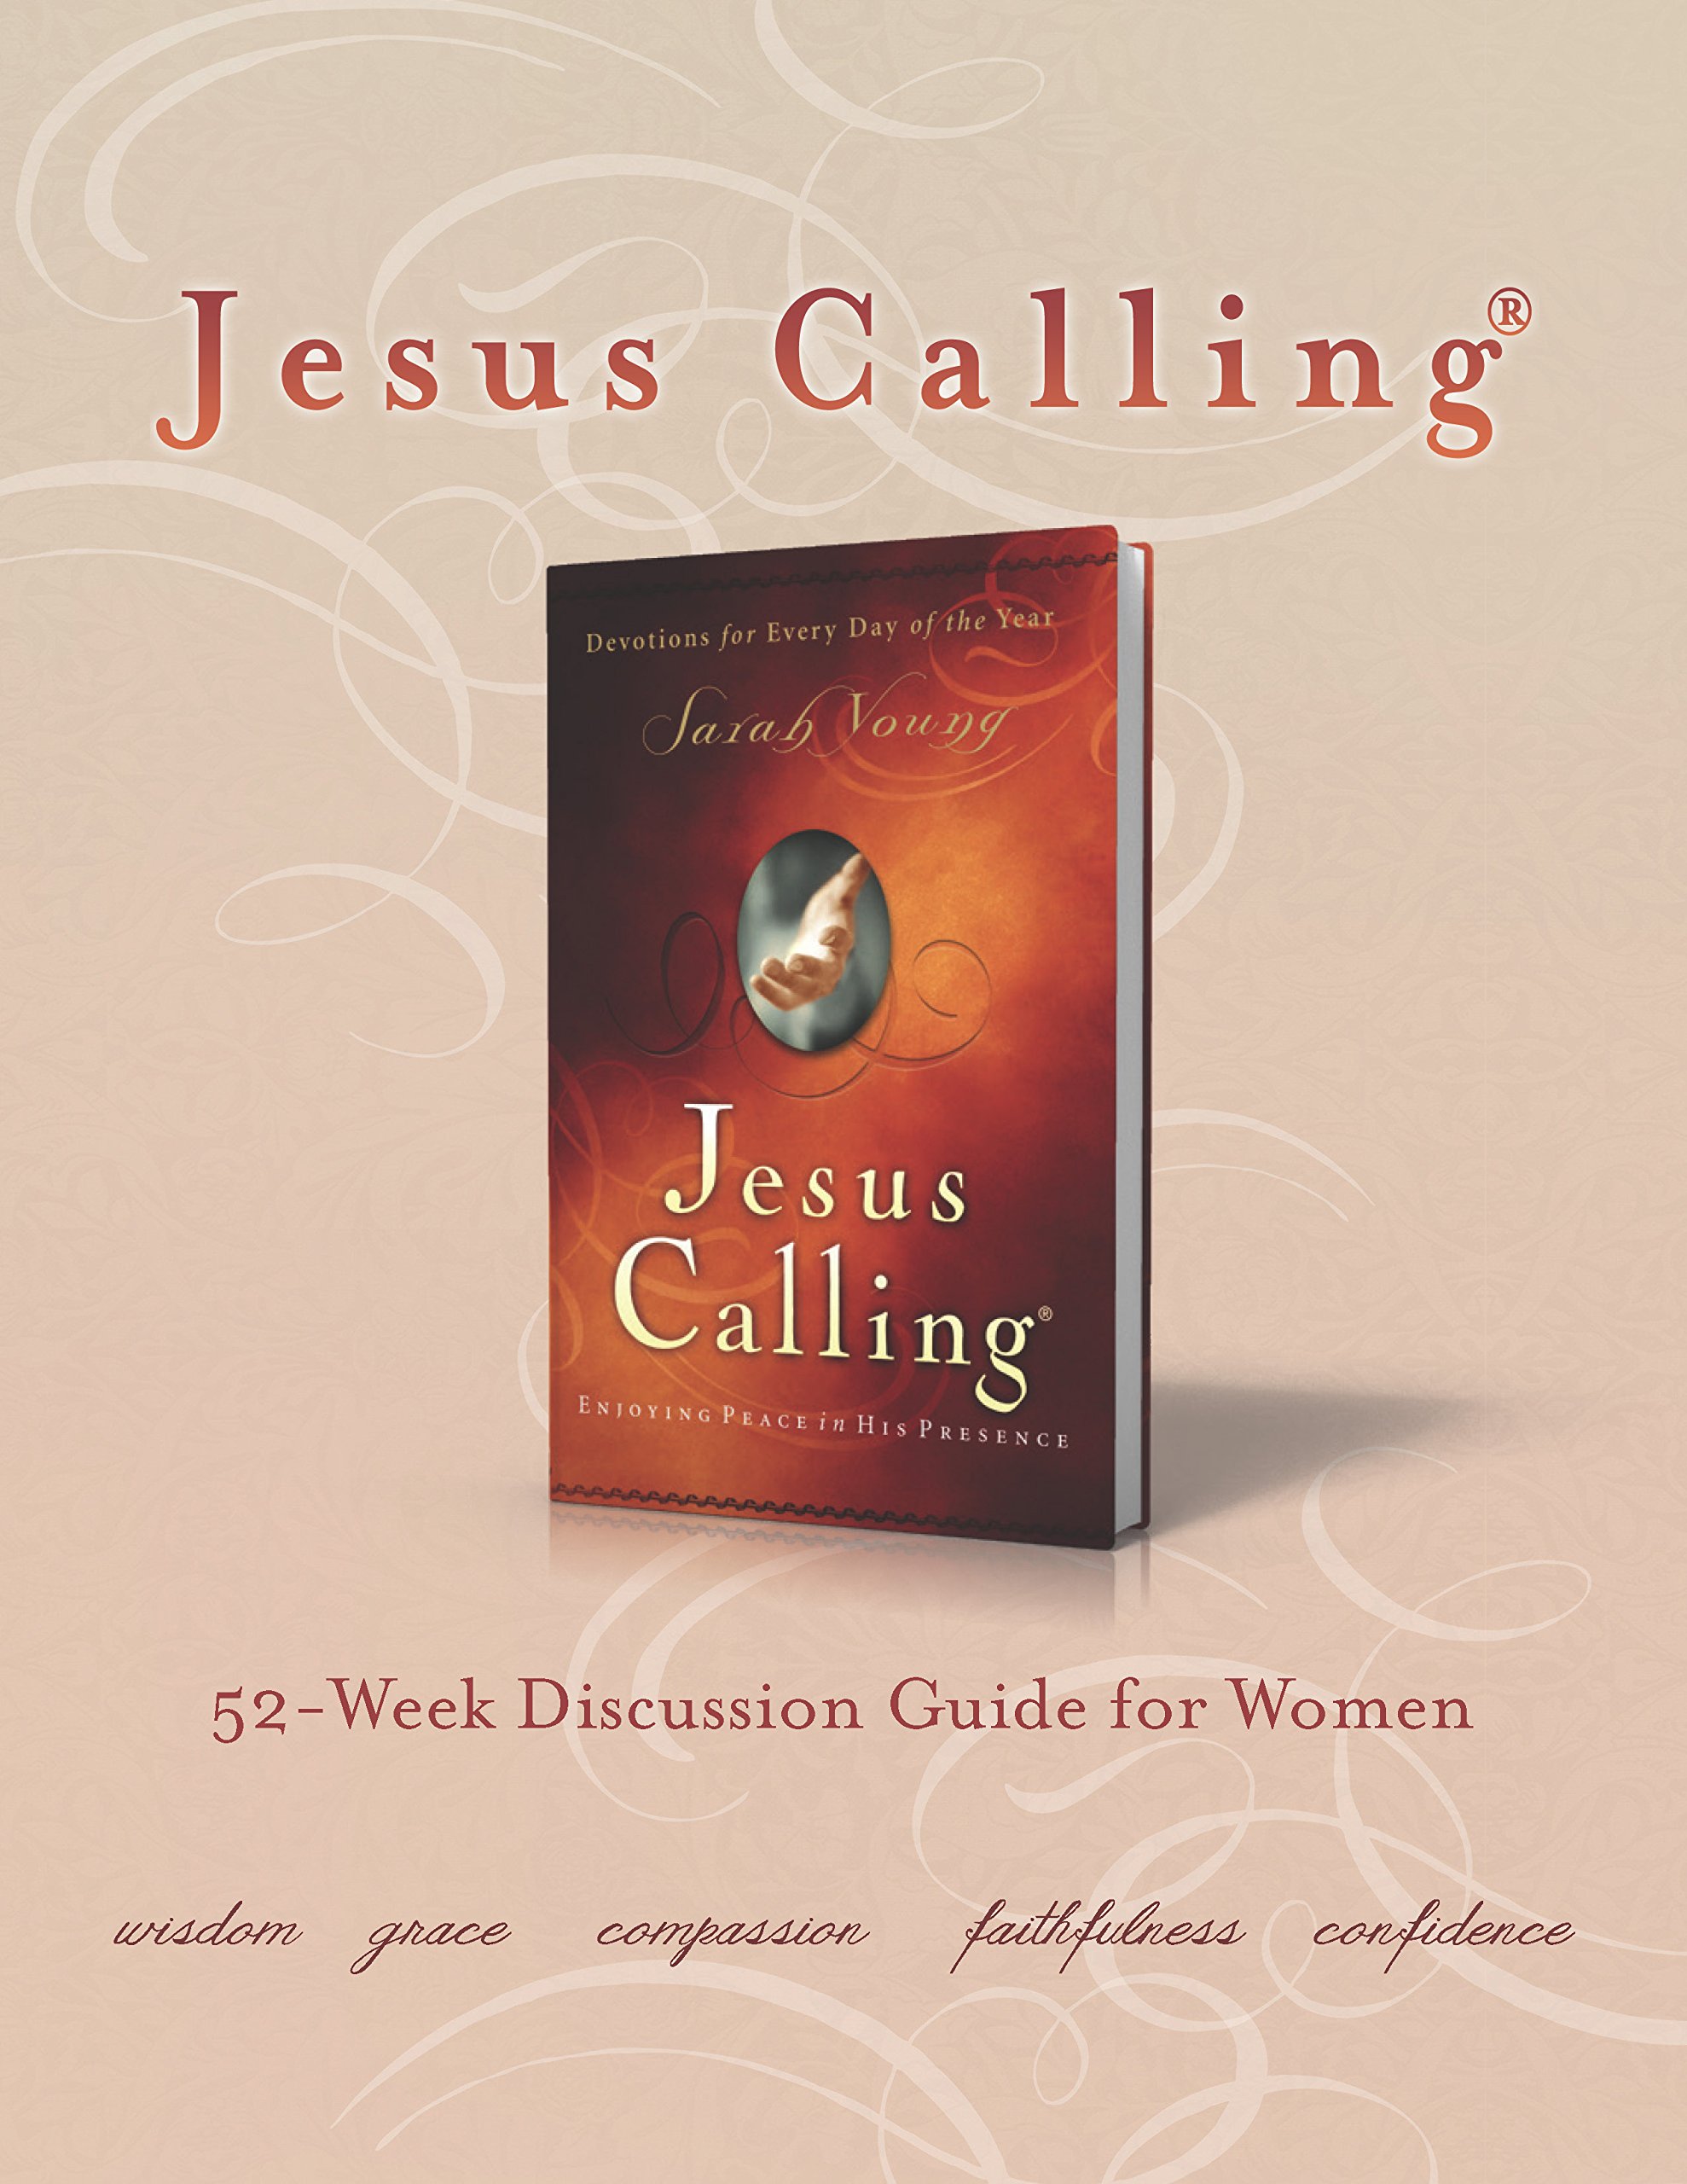 Jesus Calling Book Club Discussion Guide for Women (Jesus Calling®)